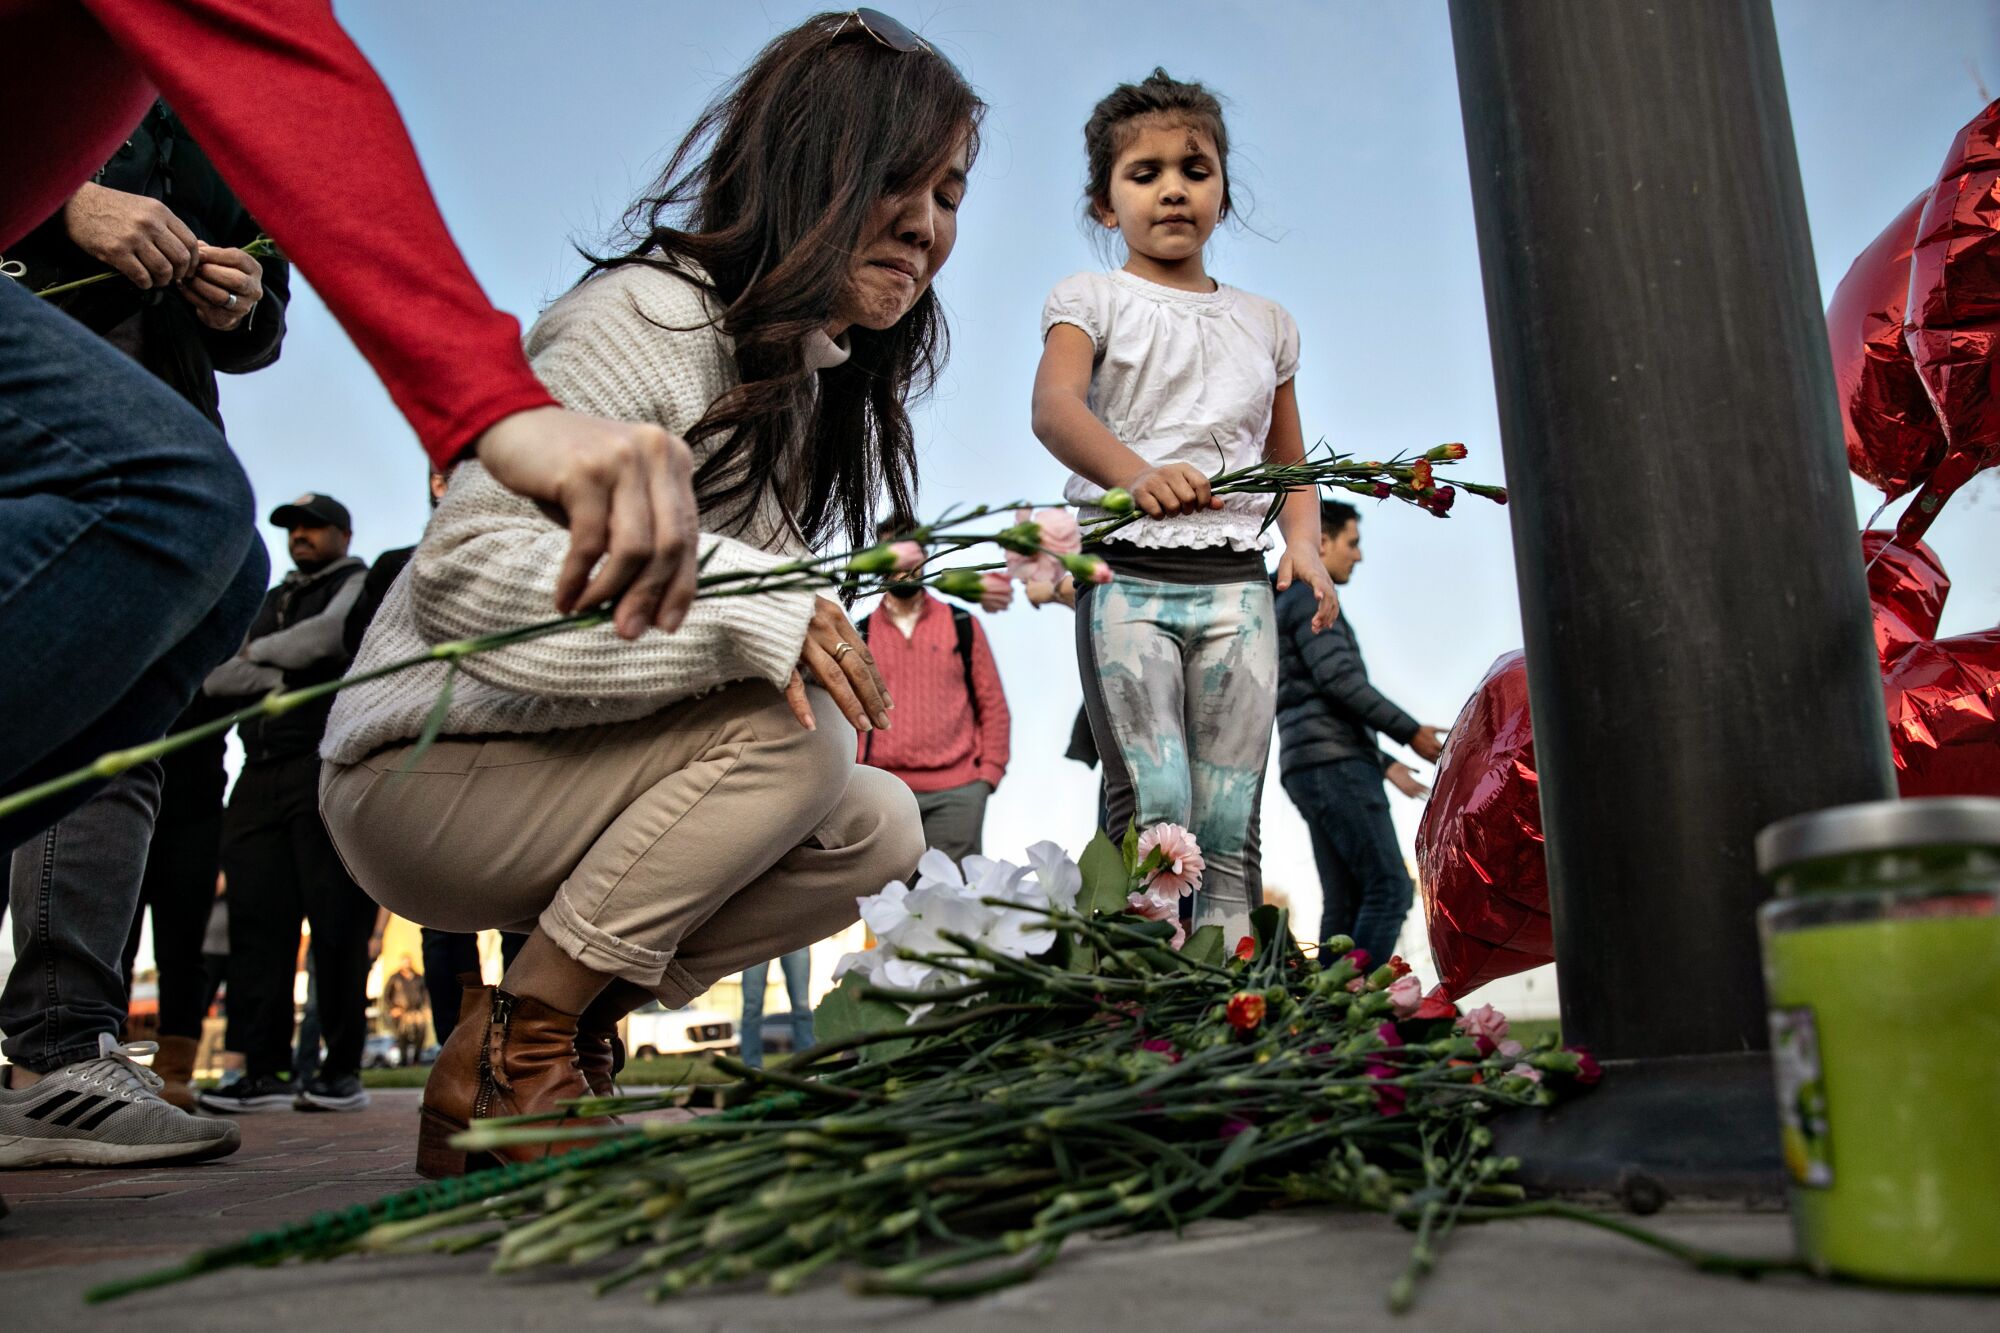  A woman and a girl place flowers at a memorial where community members gathered for a vigil.